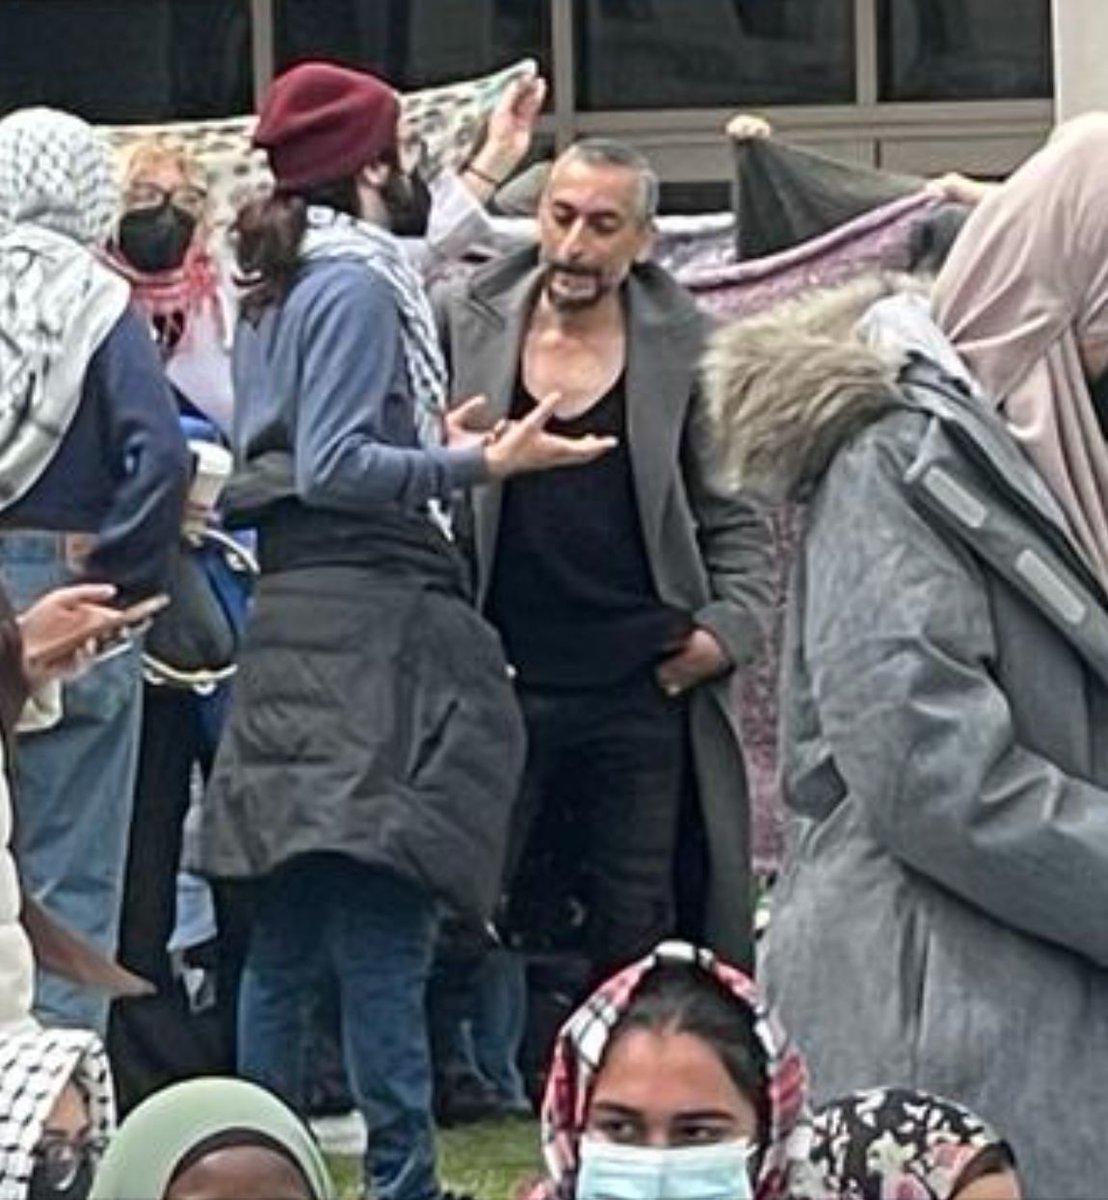 Looks like Professor Mohamed Abdou hasn't lost his campus privileges after all. Here he is with the pro-terror mob on Columbia's campus today. Days ago, Columbia president Dr. Shafik said that Abdou “will never work at Columbia again.” After the Oct. 7 attack, Abdou announced: